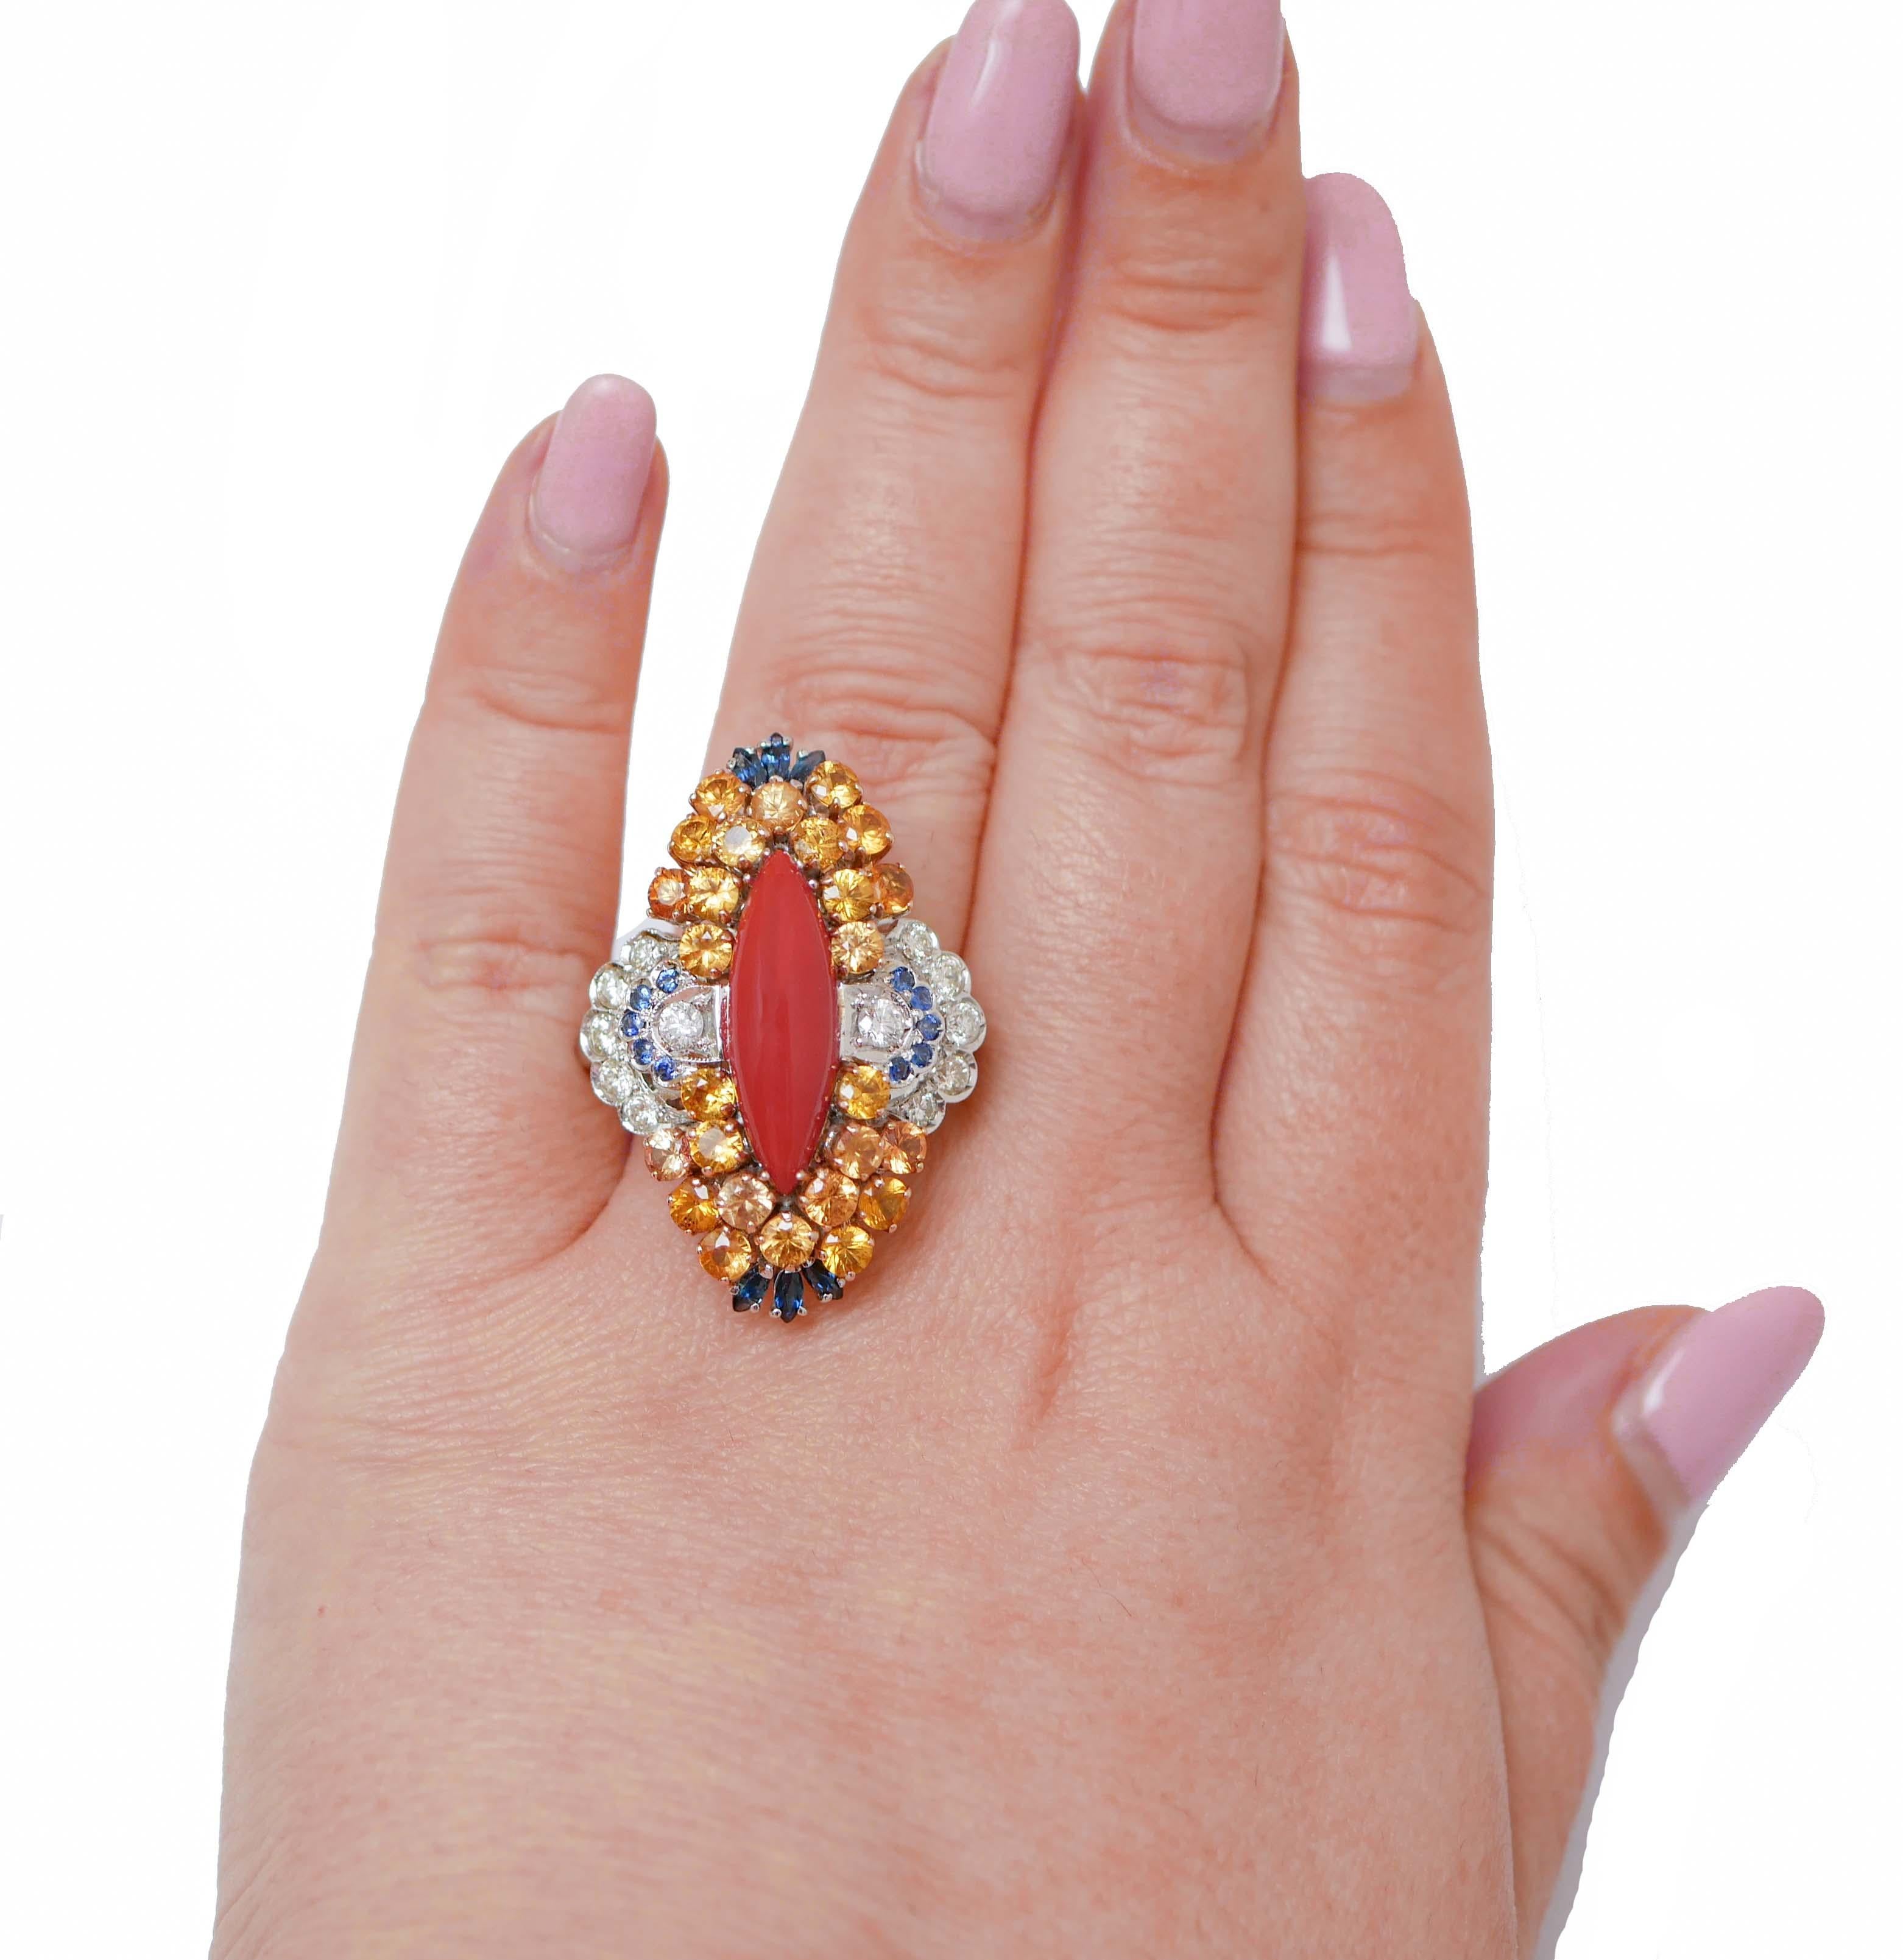 Mixed Cut Coral, Sapphires, Topazs, Diamonds, 14 Karat White Gold Ring. For Sale